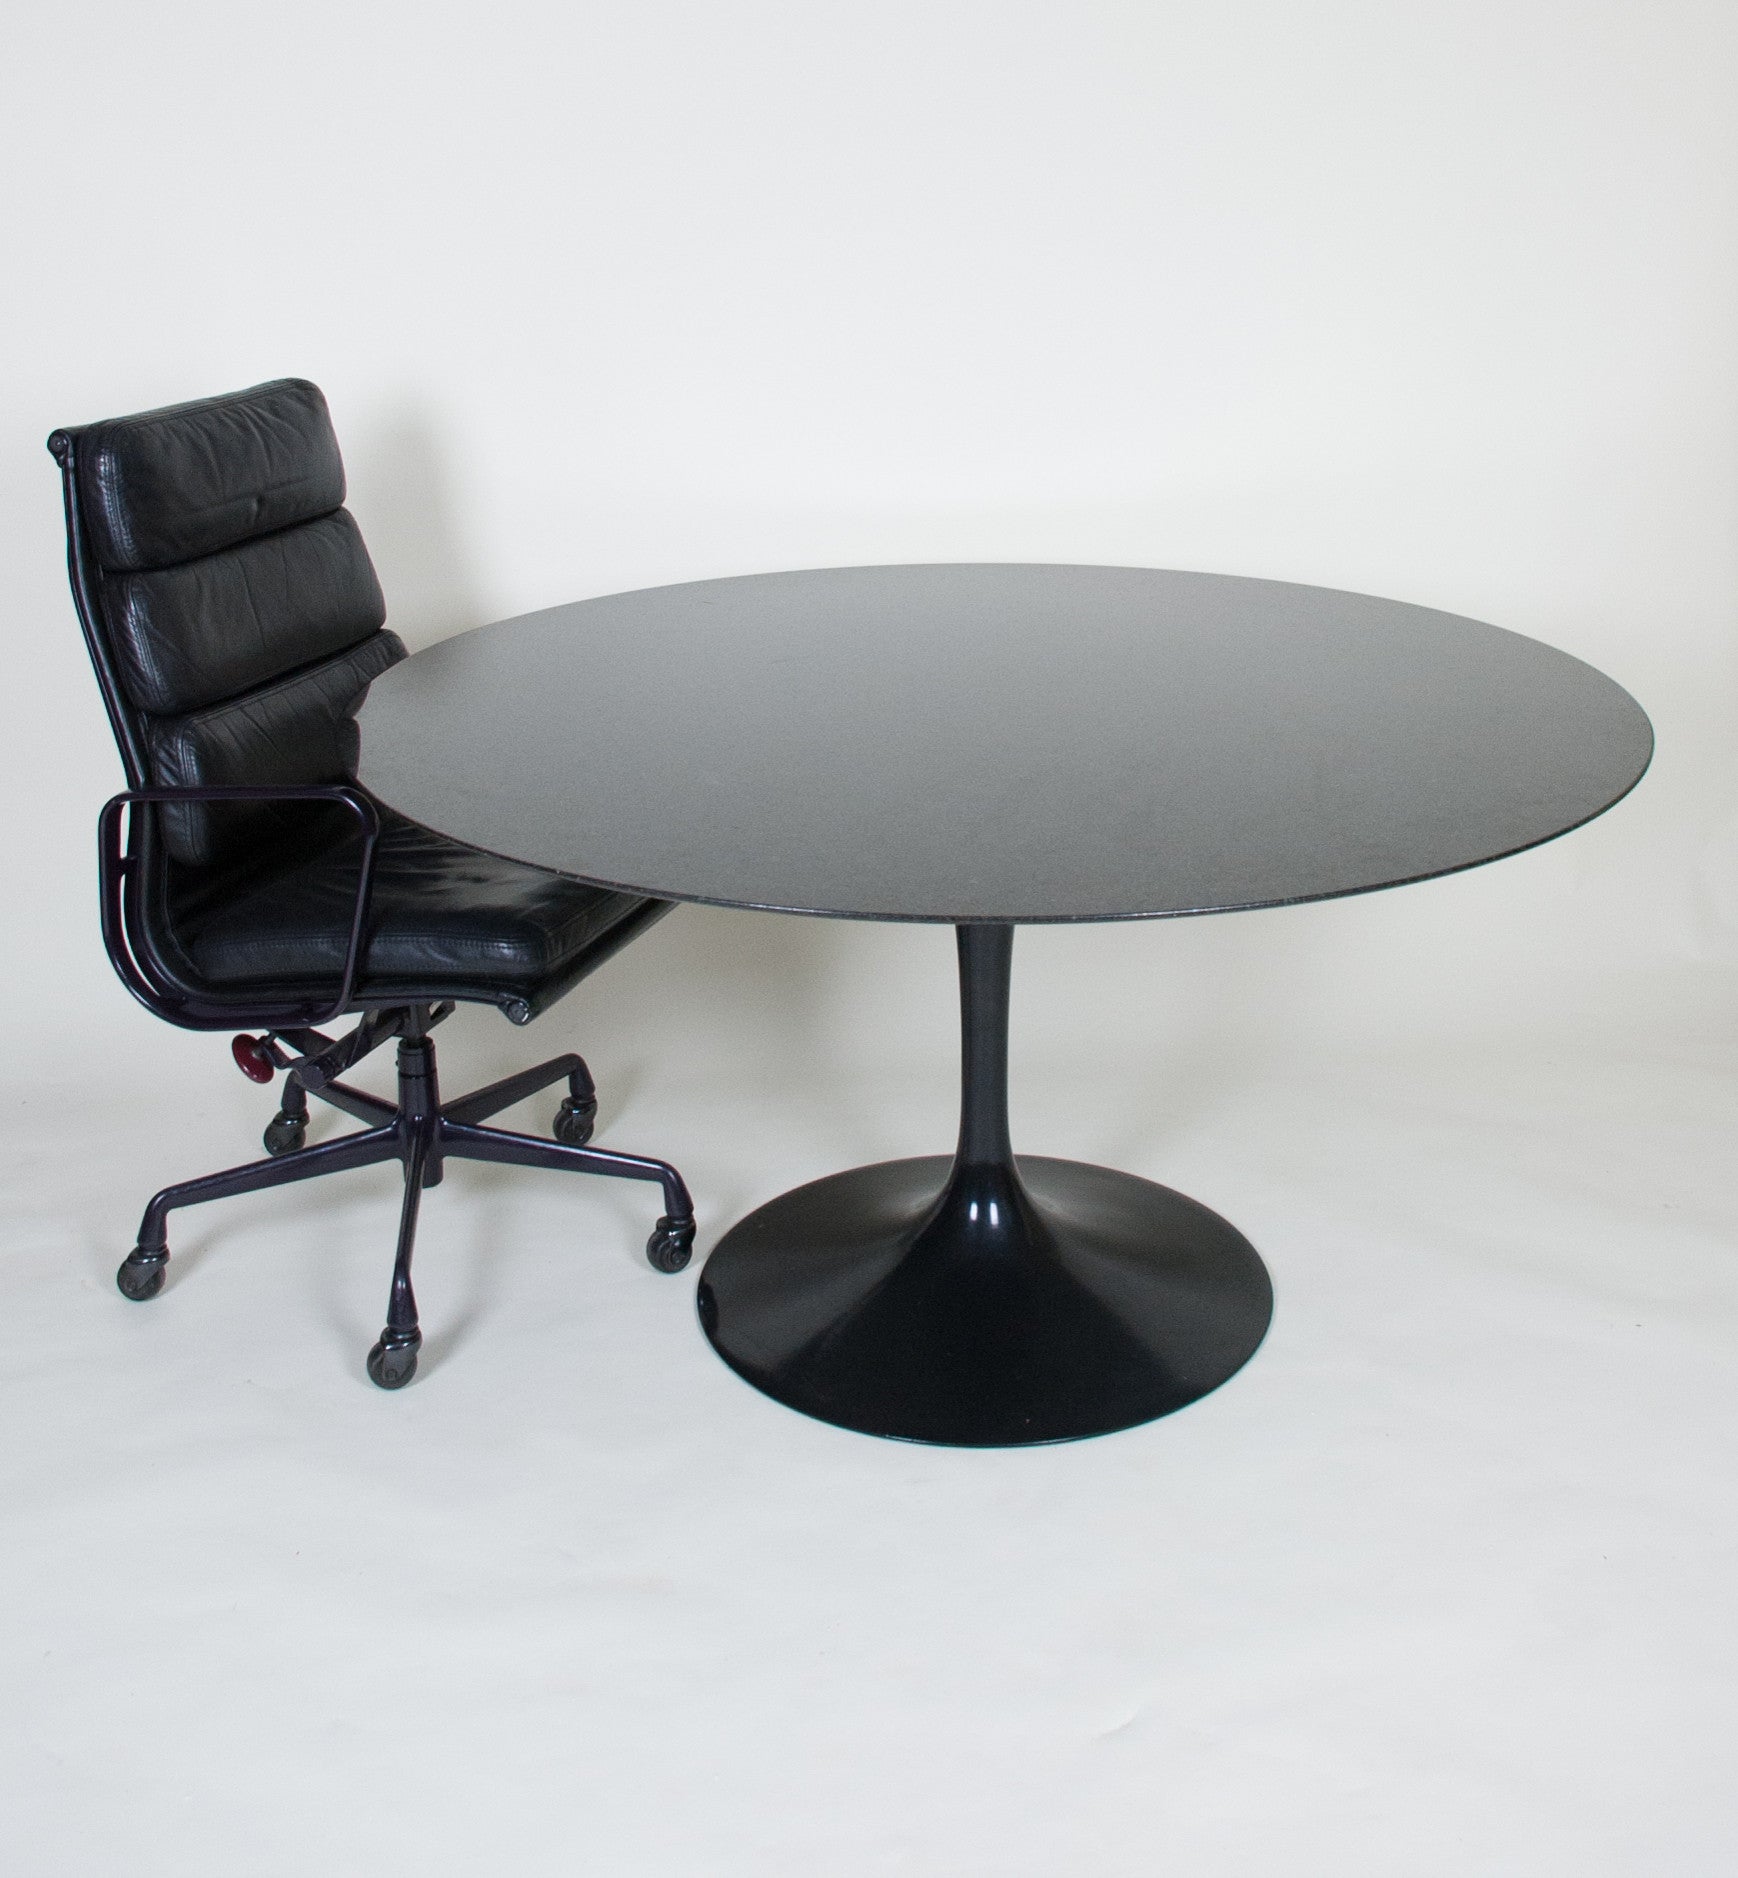 SOLD Eero Saarinen For Knoll 54 Inch Tulip Conference / Dining Table Granite, Like New!